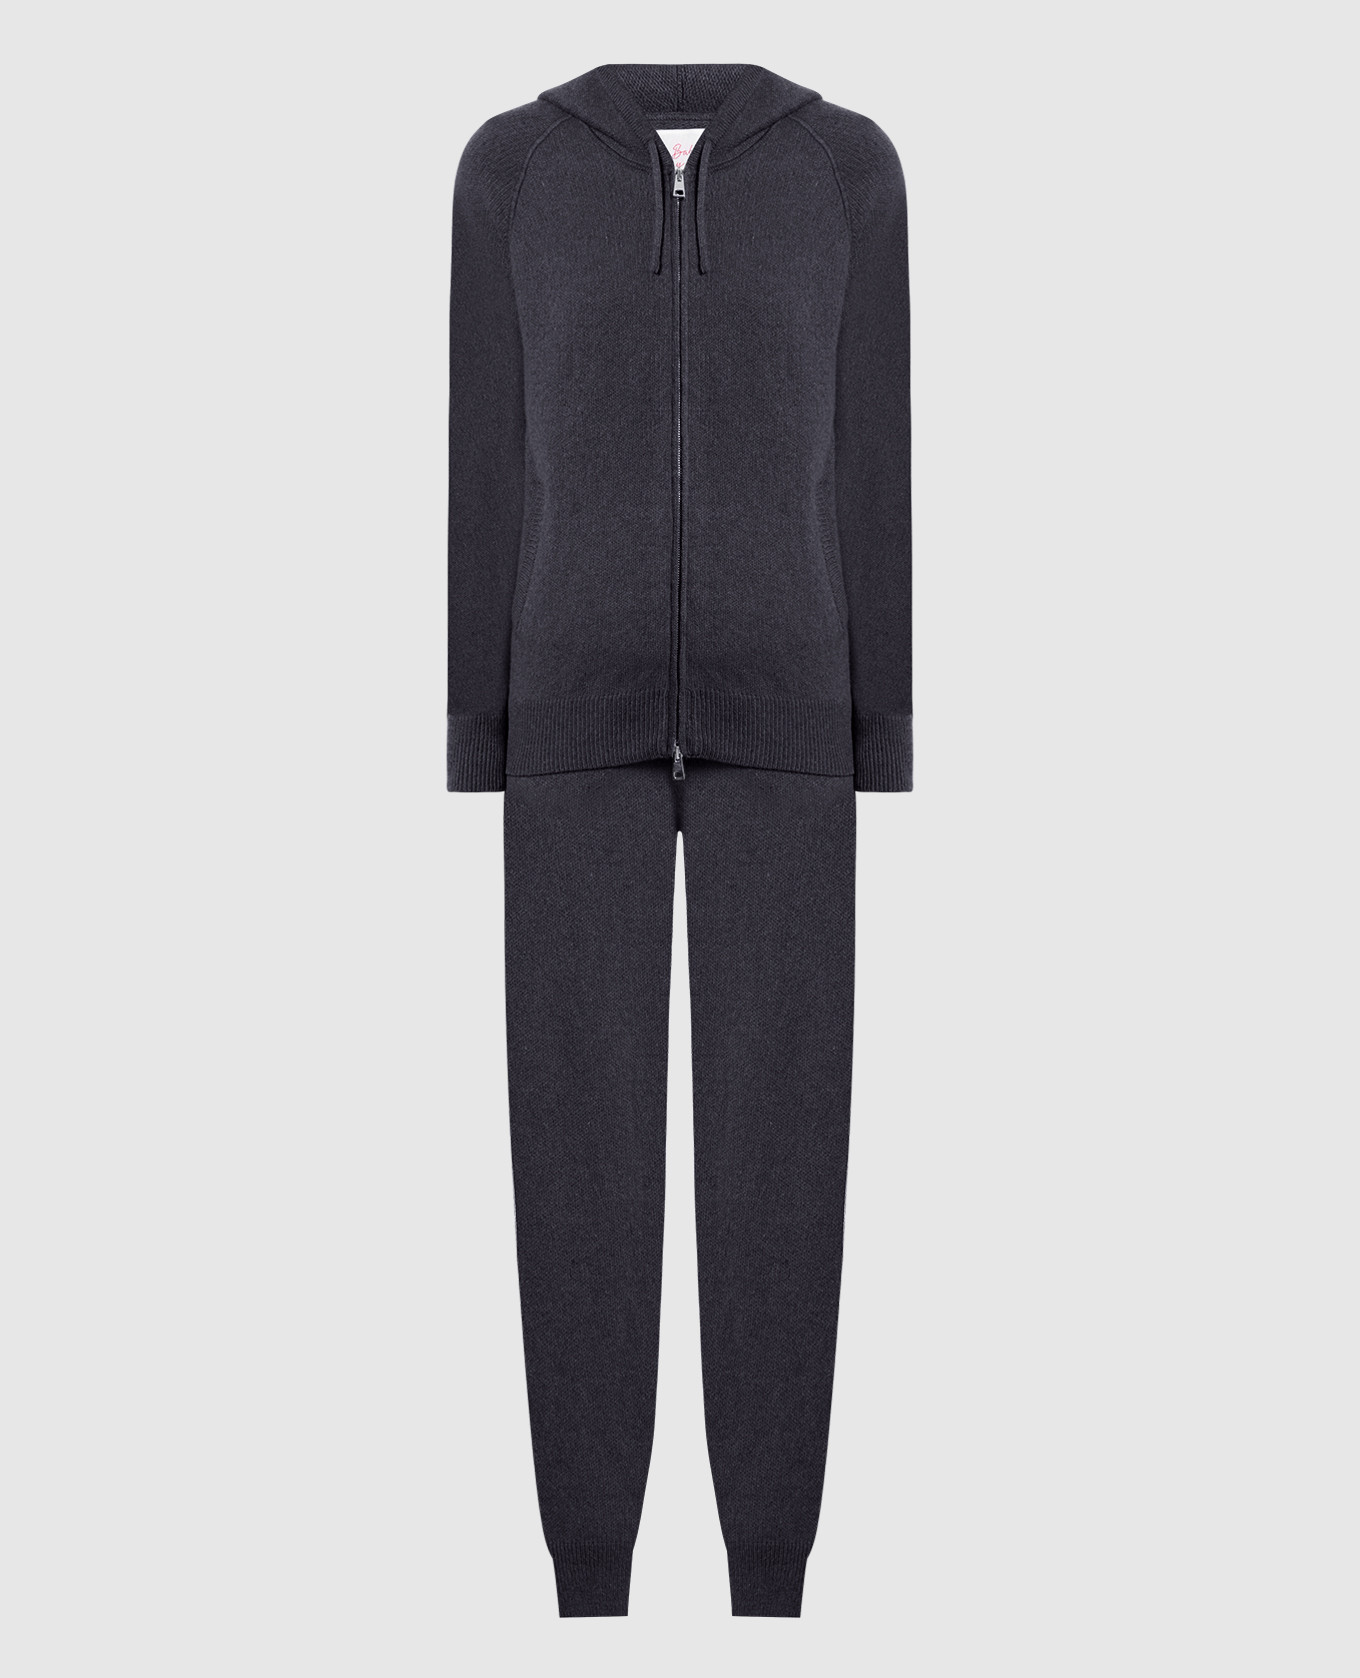 Gray sports suit made of cashmere